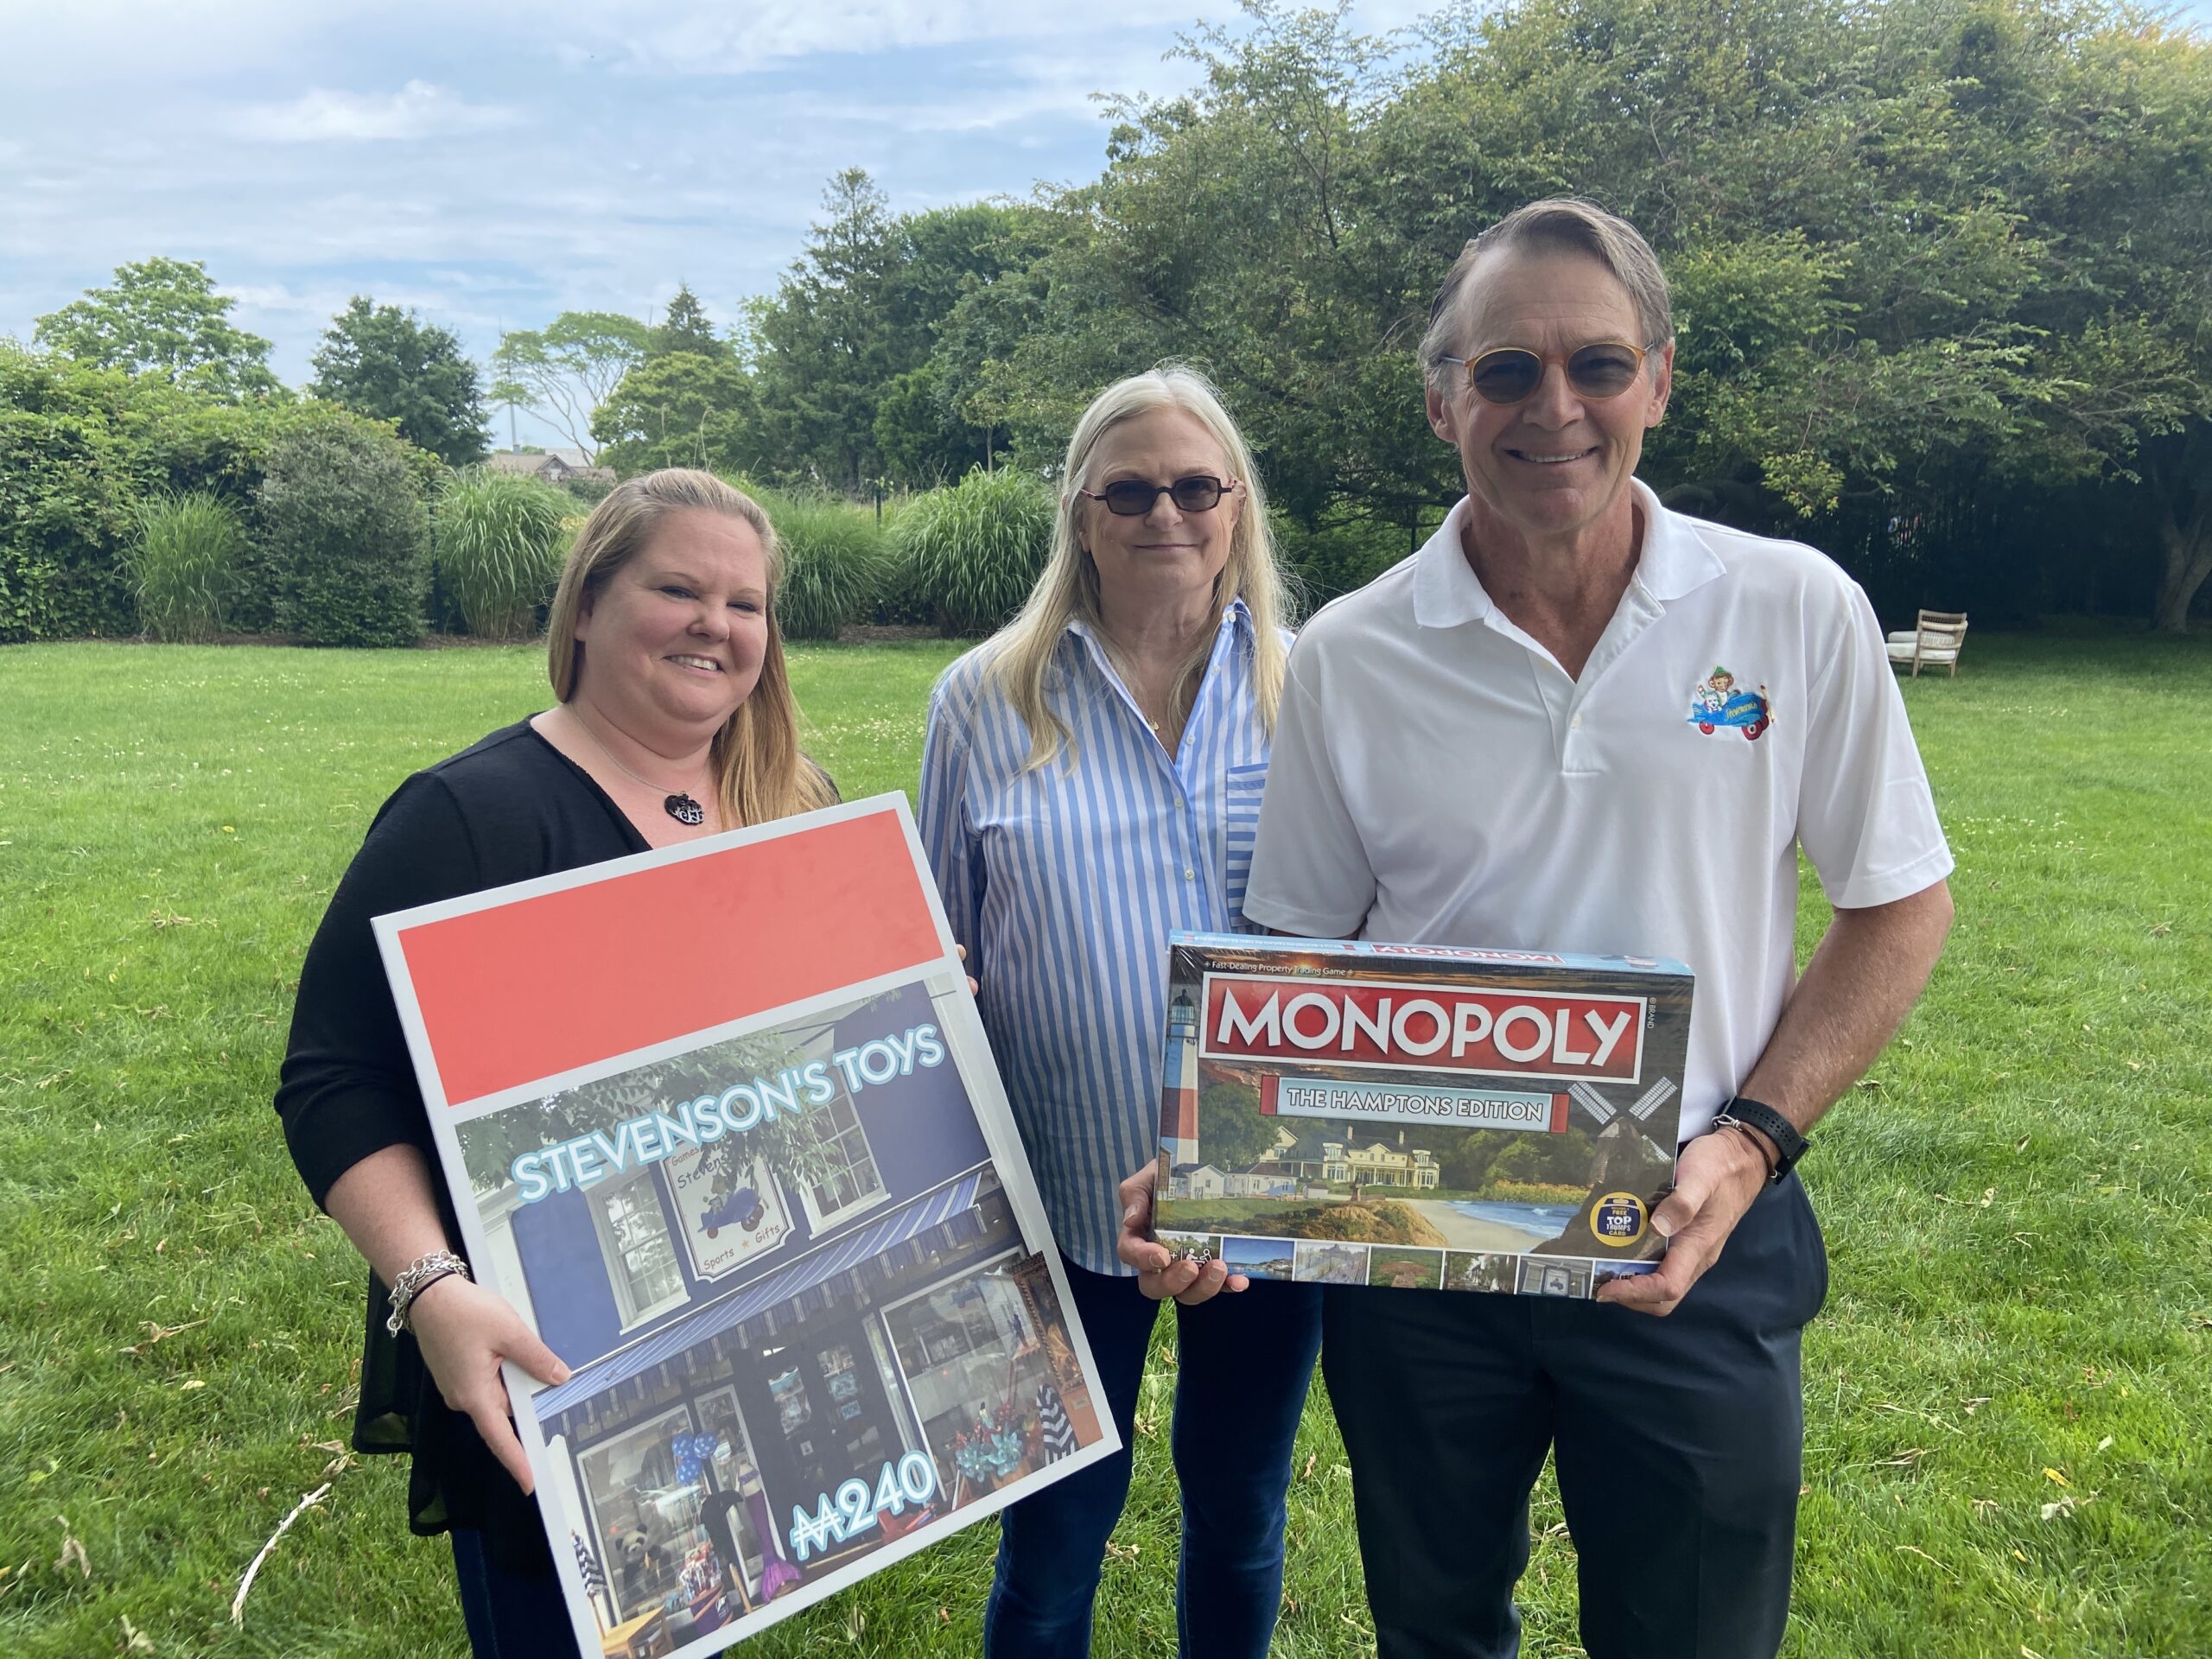 BY JULIA HEMING Roy Stevenson (left) has dreamed of having Hamptons Monopoly since he opened his story 20 years ago.